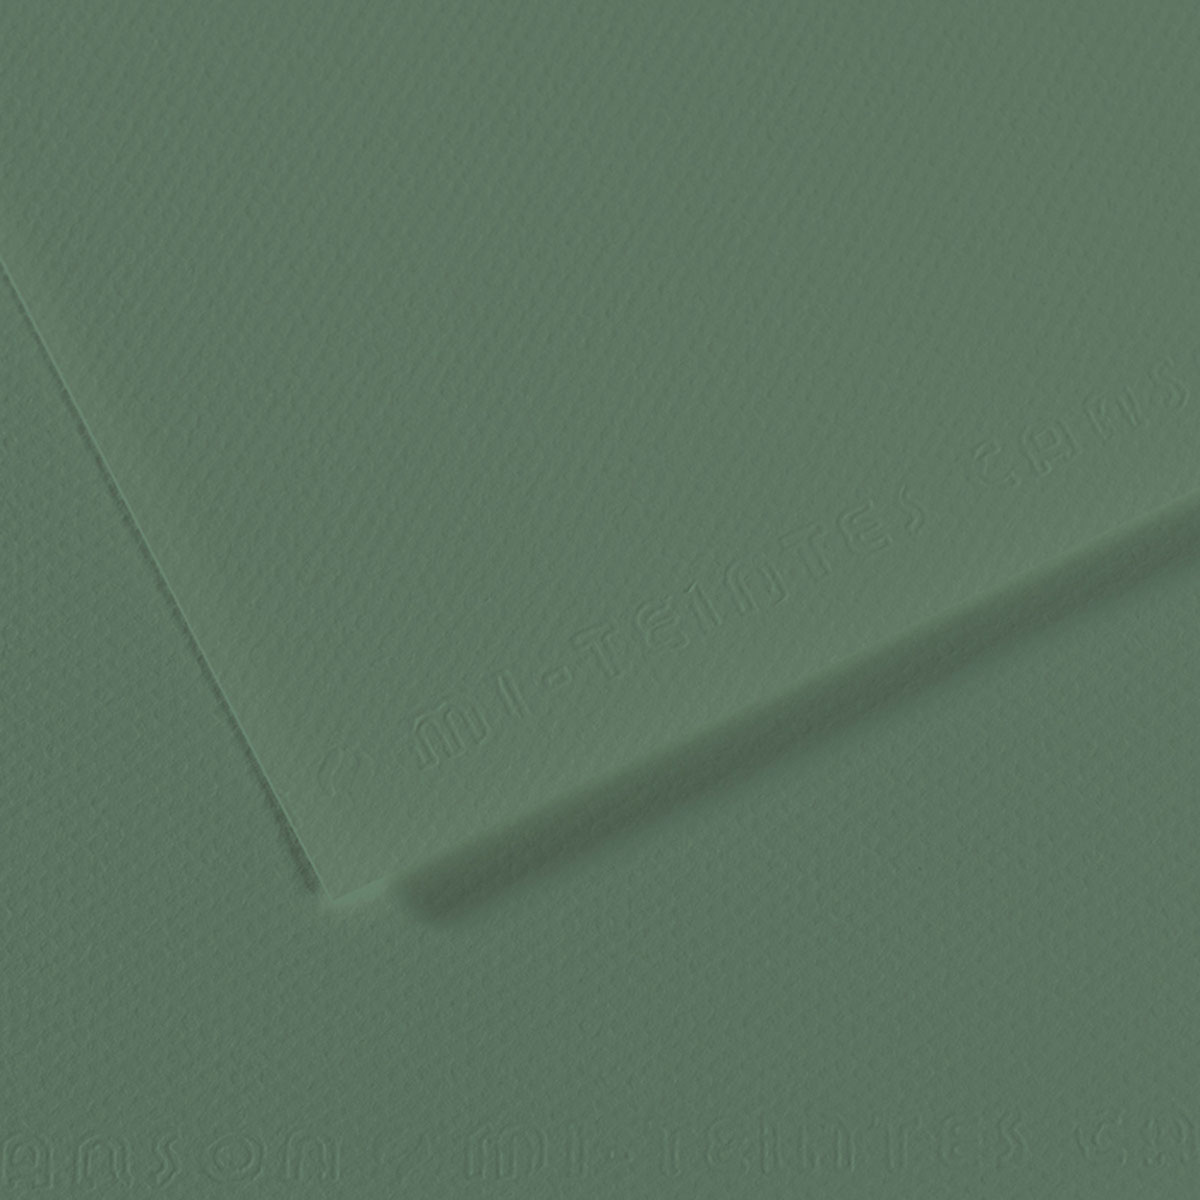 Canson Mi-Teintes Drawing Paper - Sage Green 19 x 25